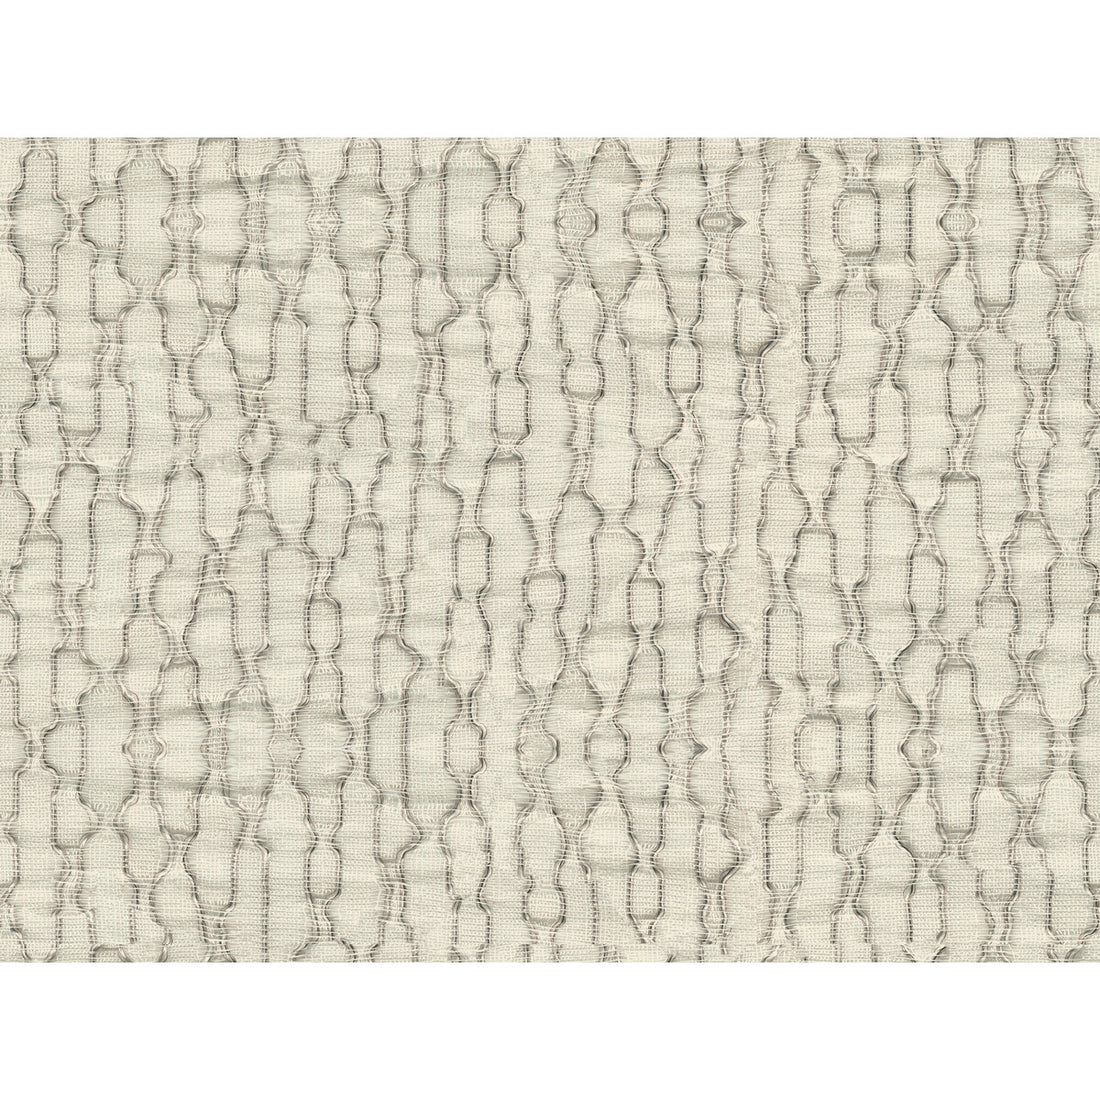 Kravet Contract fabric in 4530-16 color - pattern 4530.16.0 - by Kravet Contract